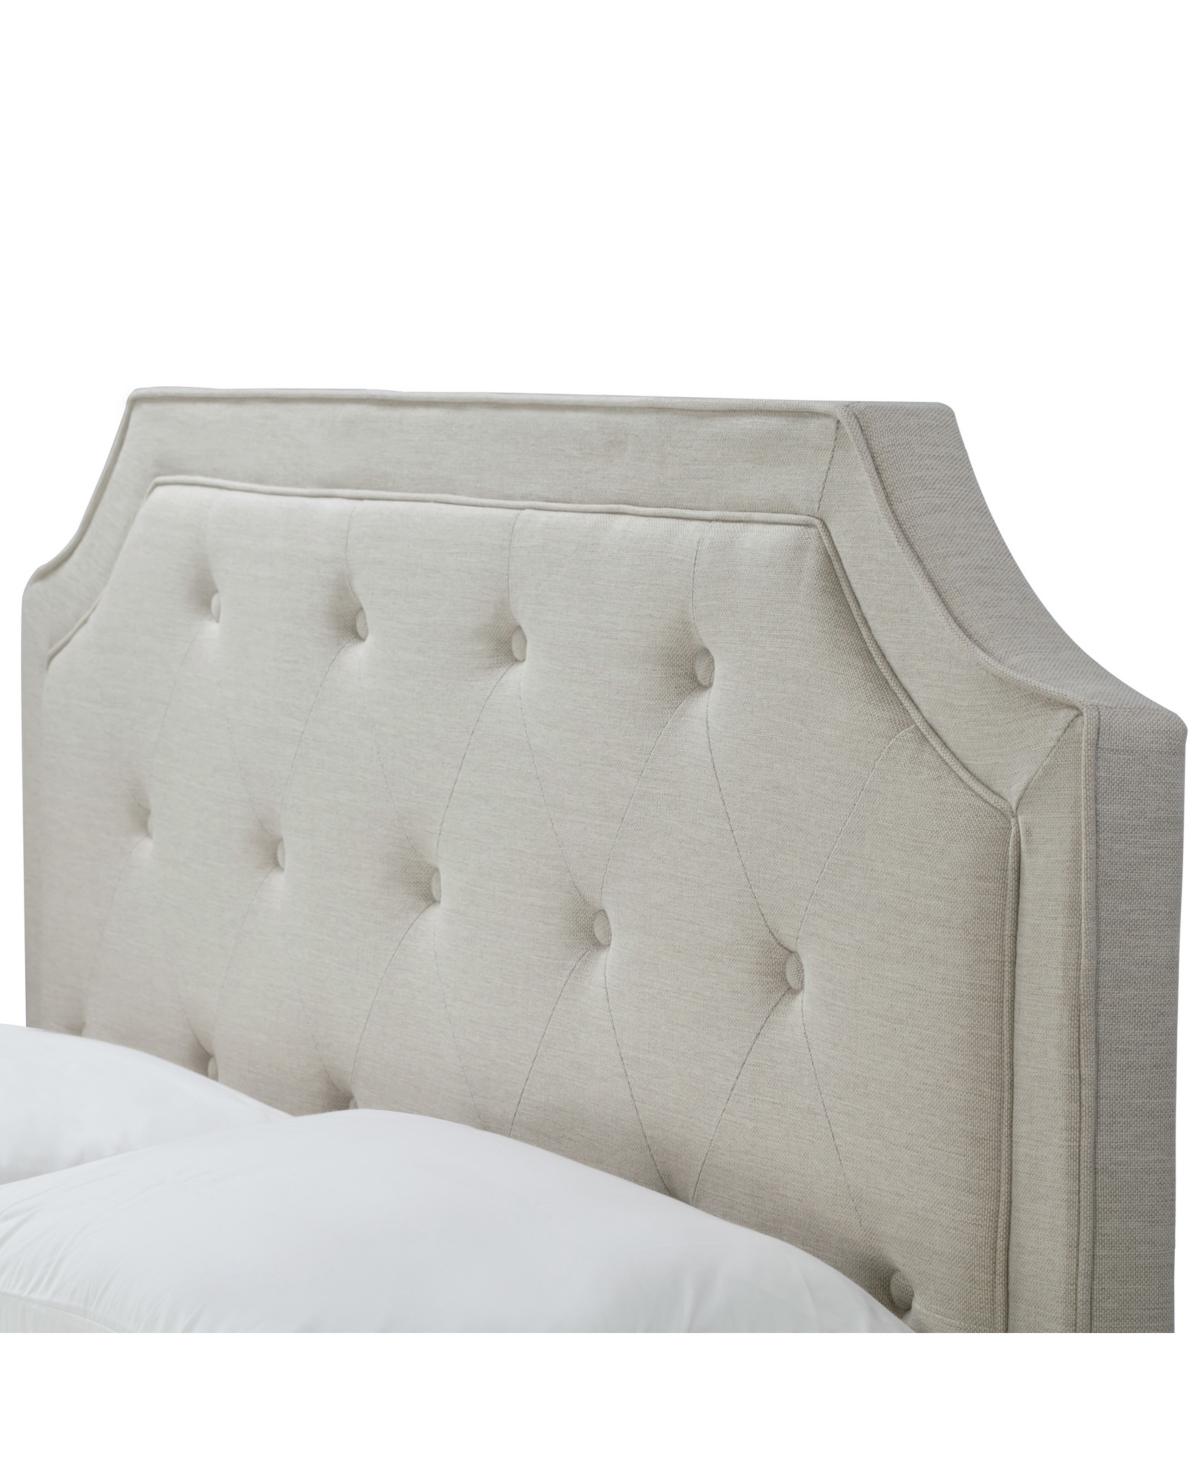 Shop Glamour Home 49.38" Aria Fabric, Rubberwood Queen Bed In Beige